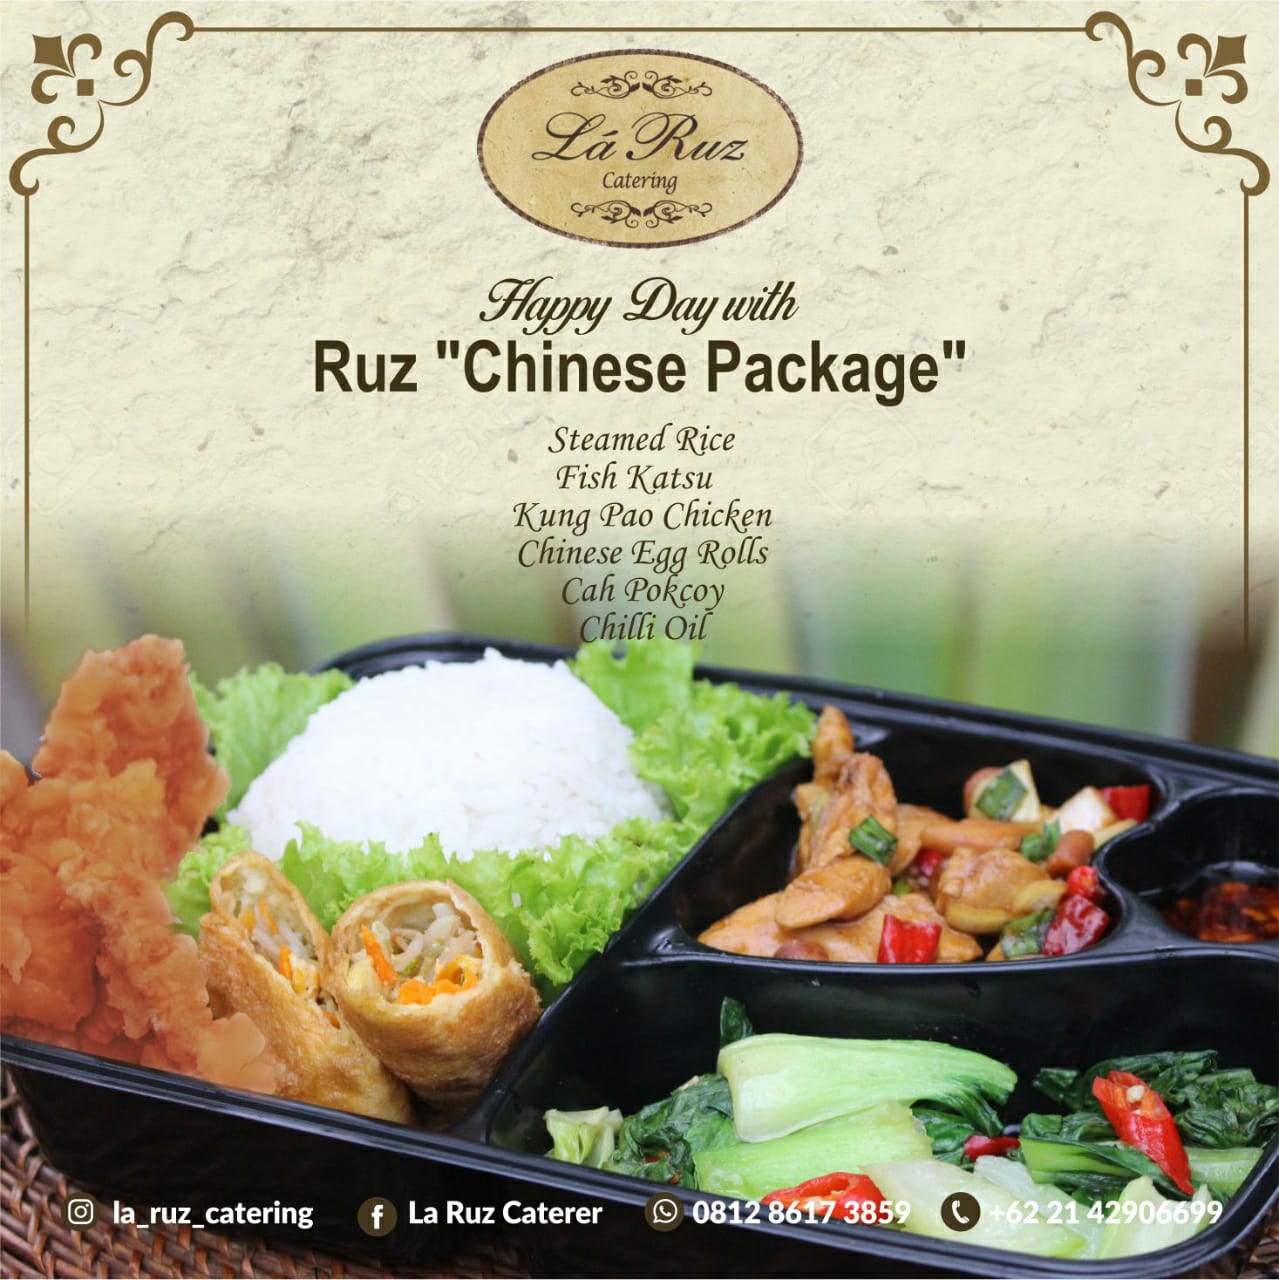 Paket Chinese Food by La Ruz Catering